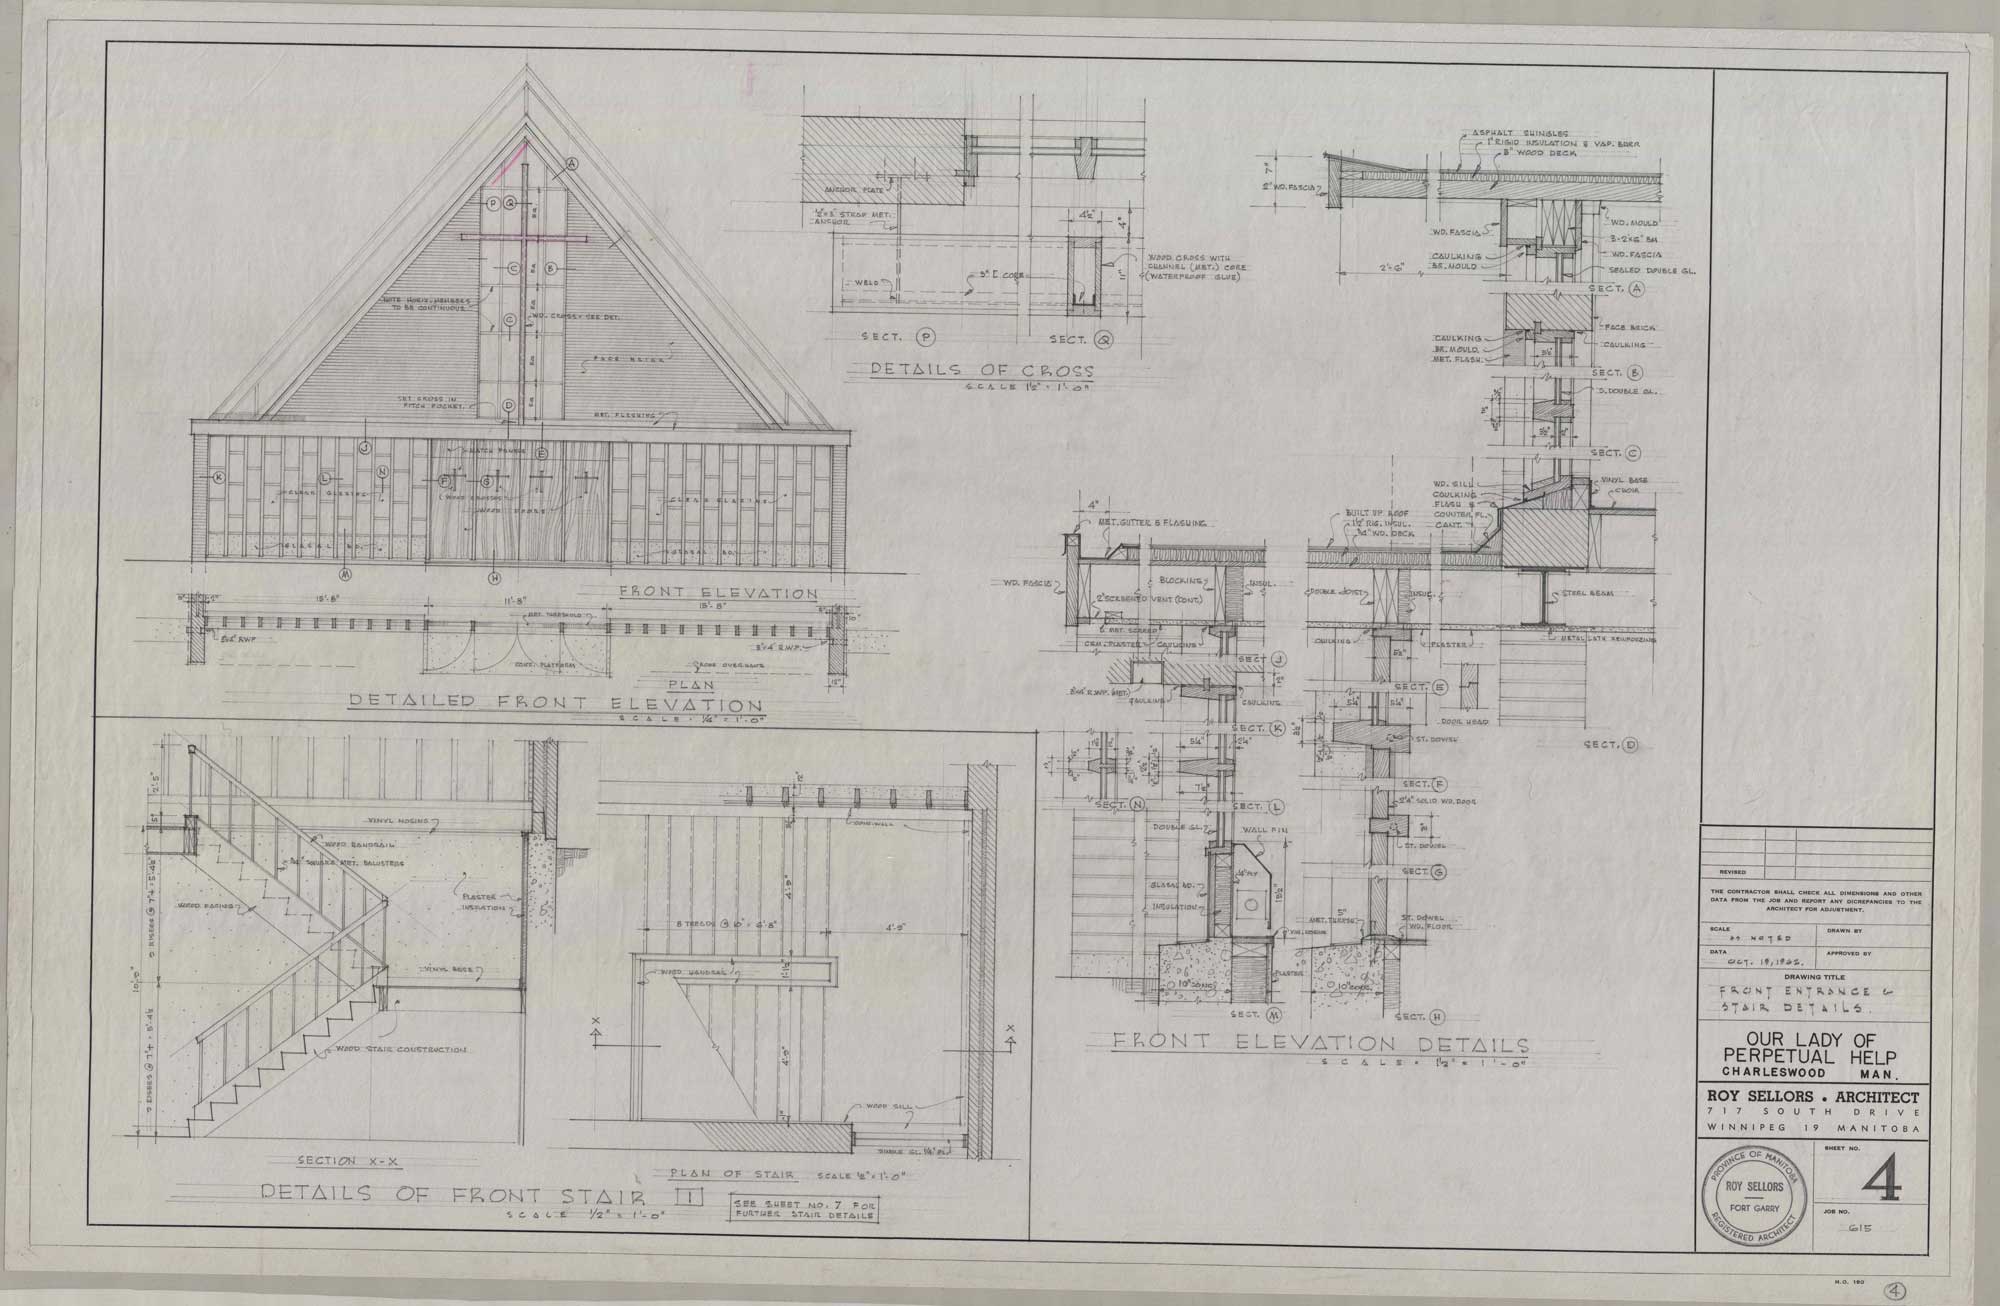 Image shows detailed sketches of the front elevation and the front staircase.